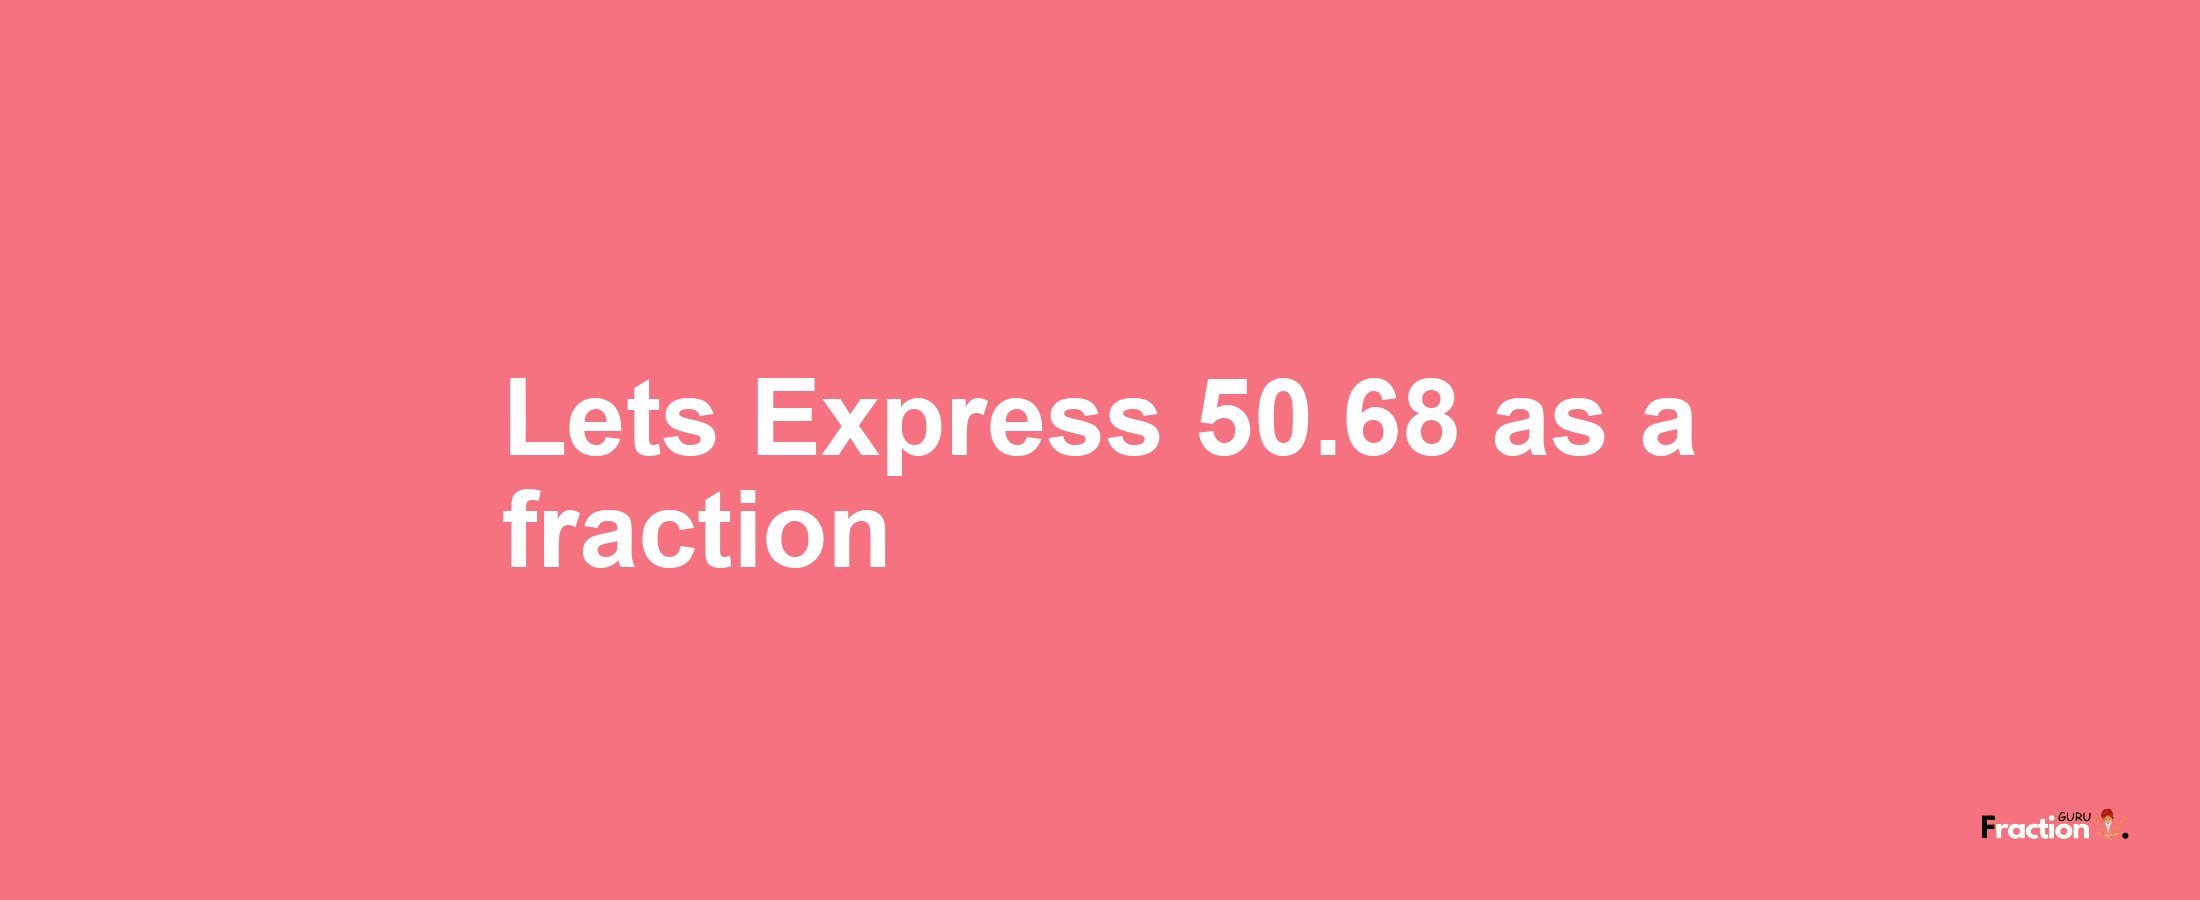 Lets Express 50.68 as afraction